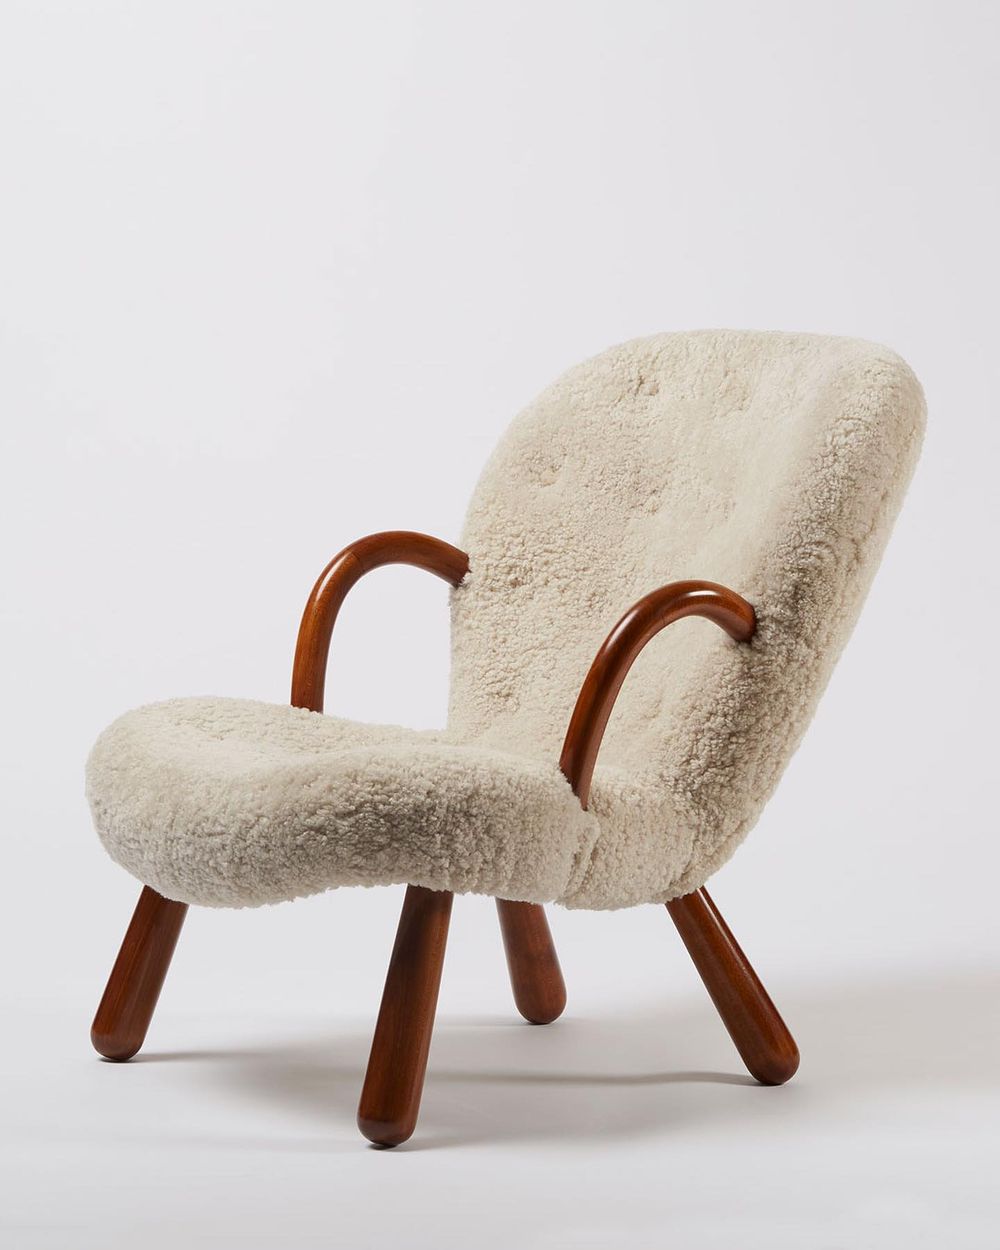 Philip Arctander Clam Chair in Shearling modernlinknyc